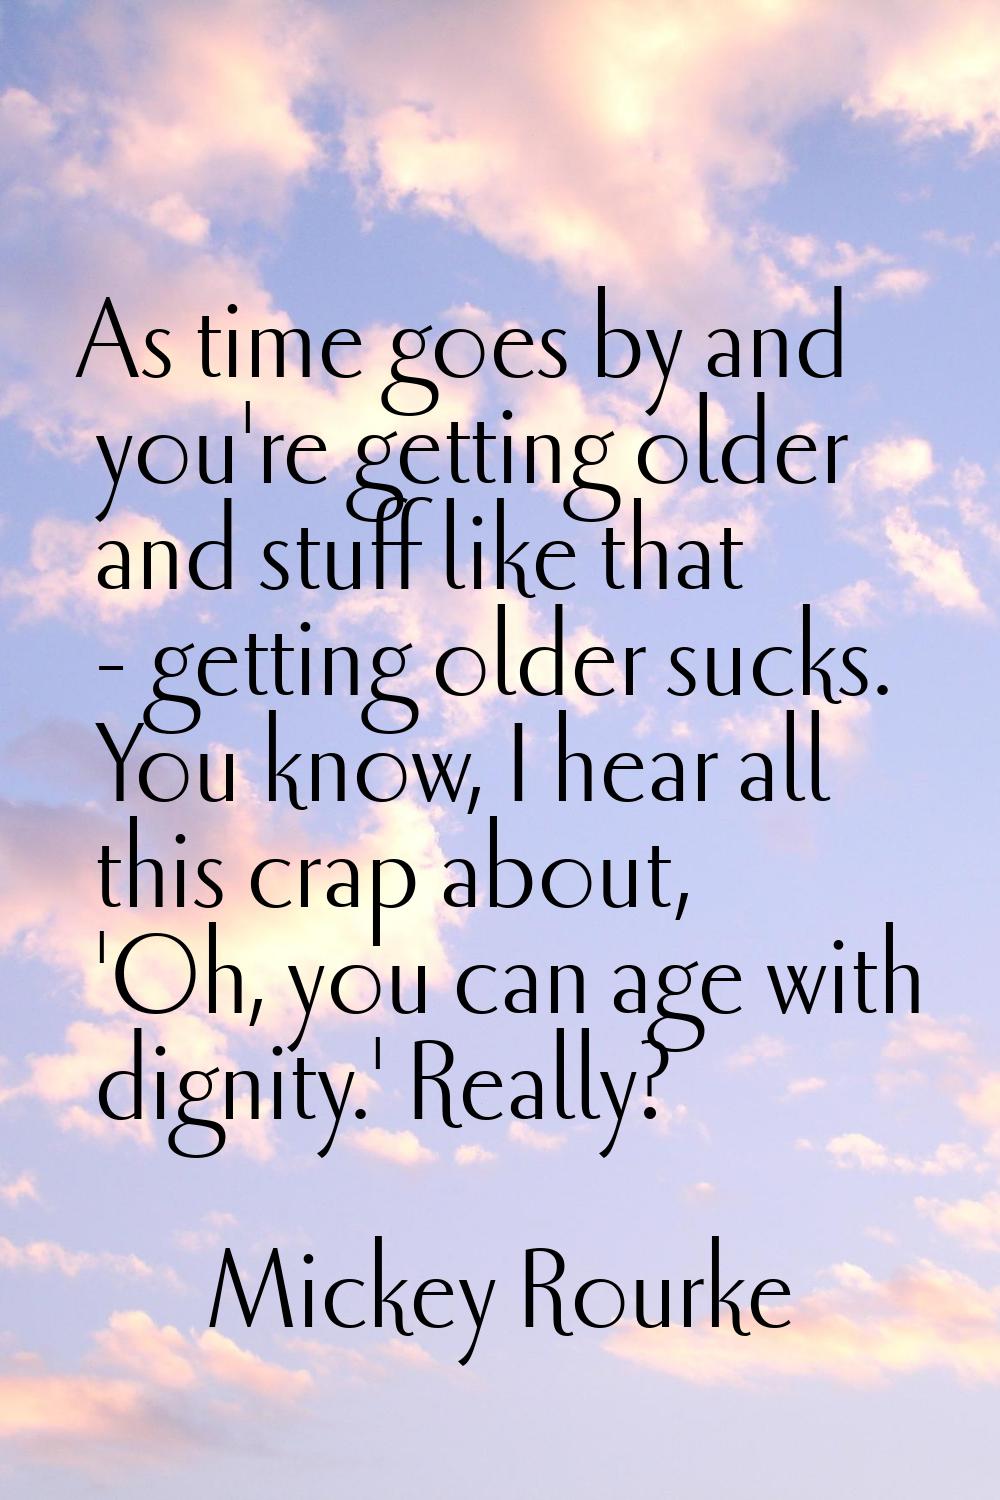 As time goes by and you're getting older and stuff like that - getting older sucks. You know, I hea